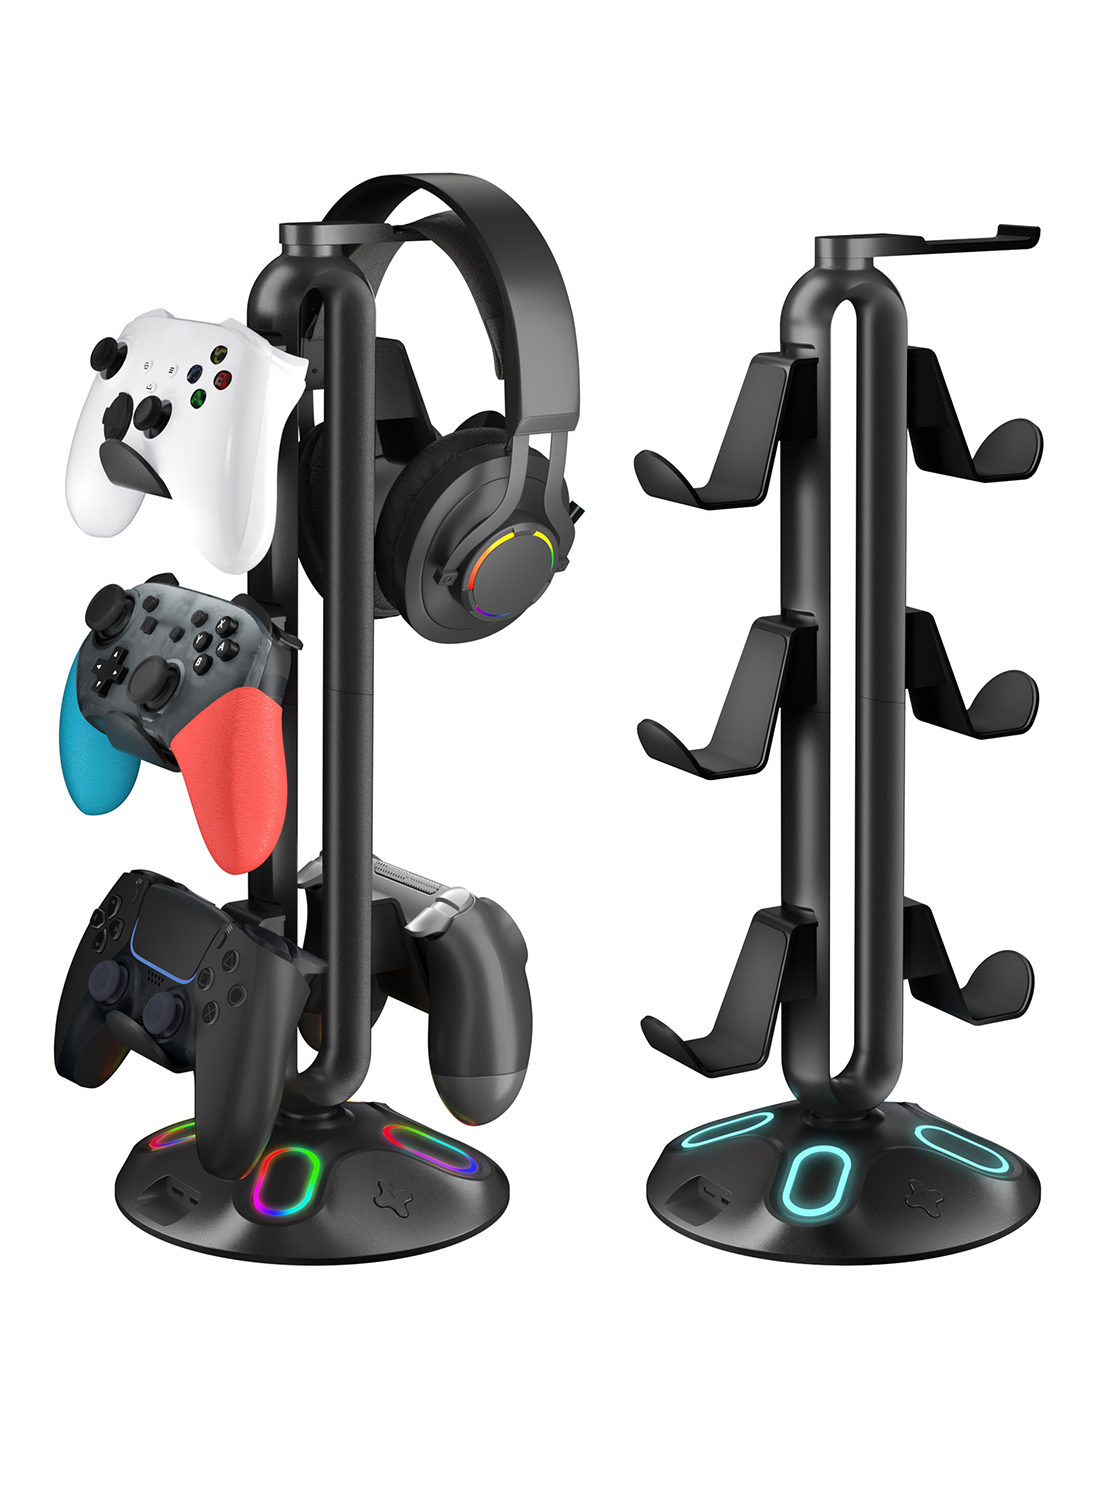 3-Layer Controllers Holder Display Stand with RGB Light and USB Ports for Game Controllers/Headsets/Consoles/Mobile Phones Tablet